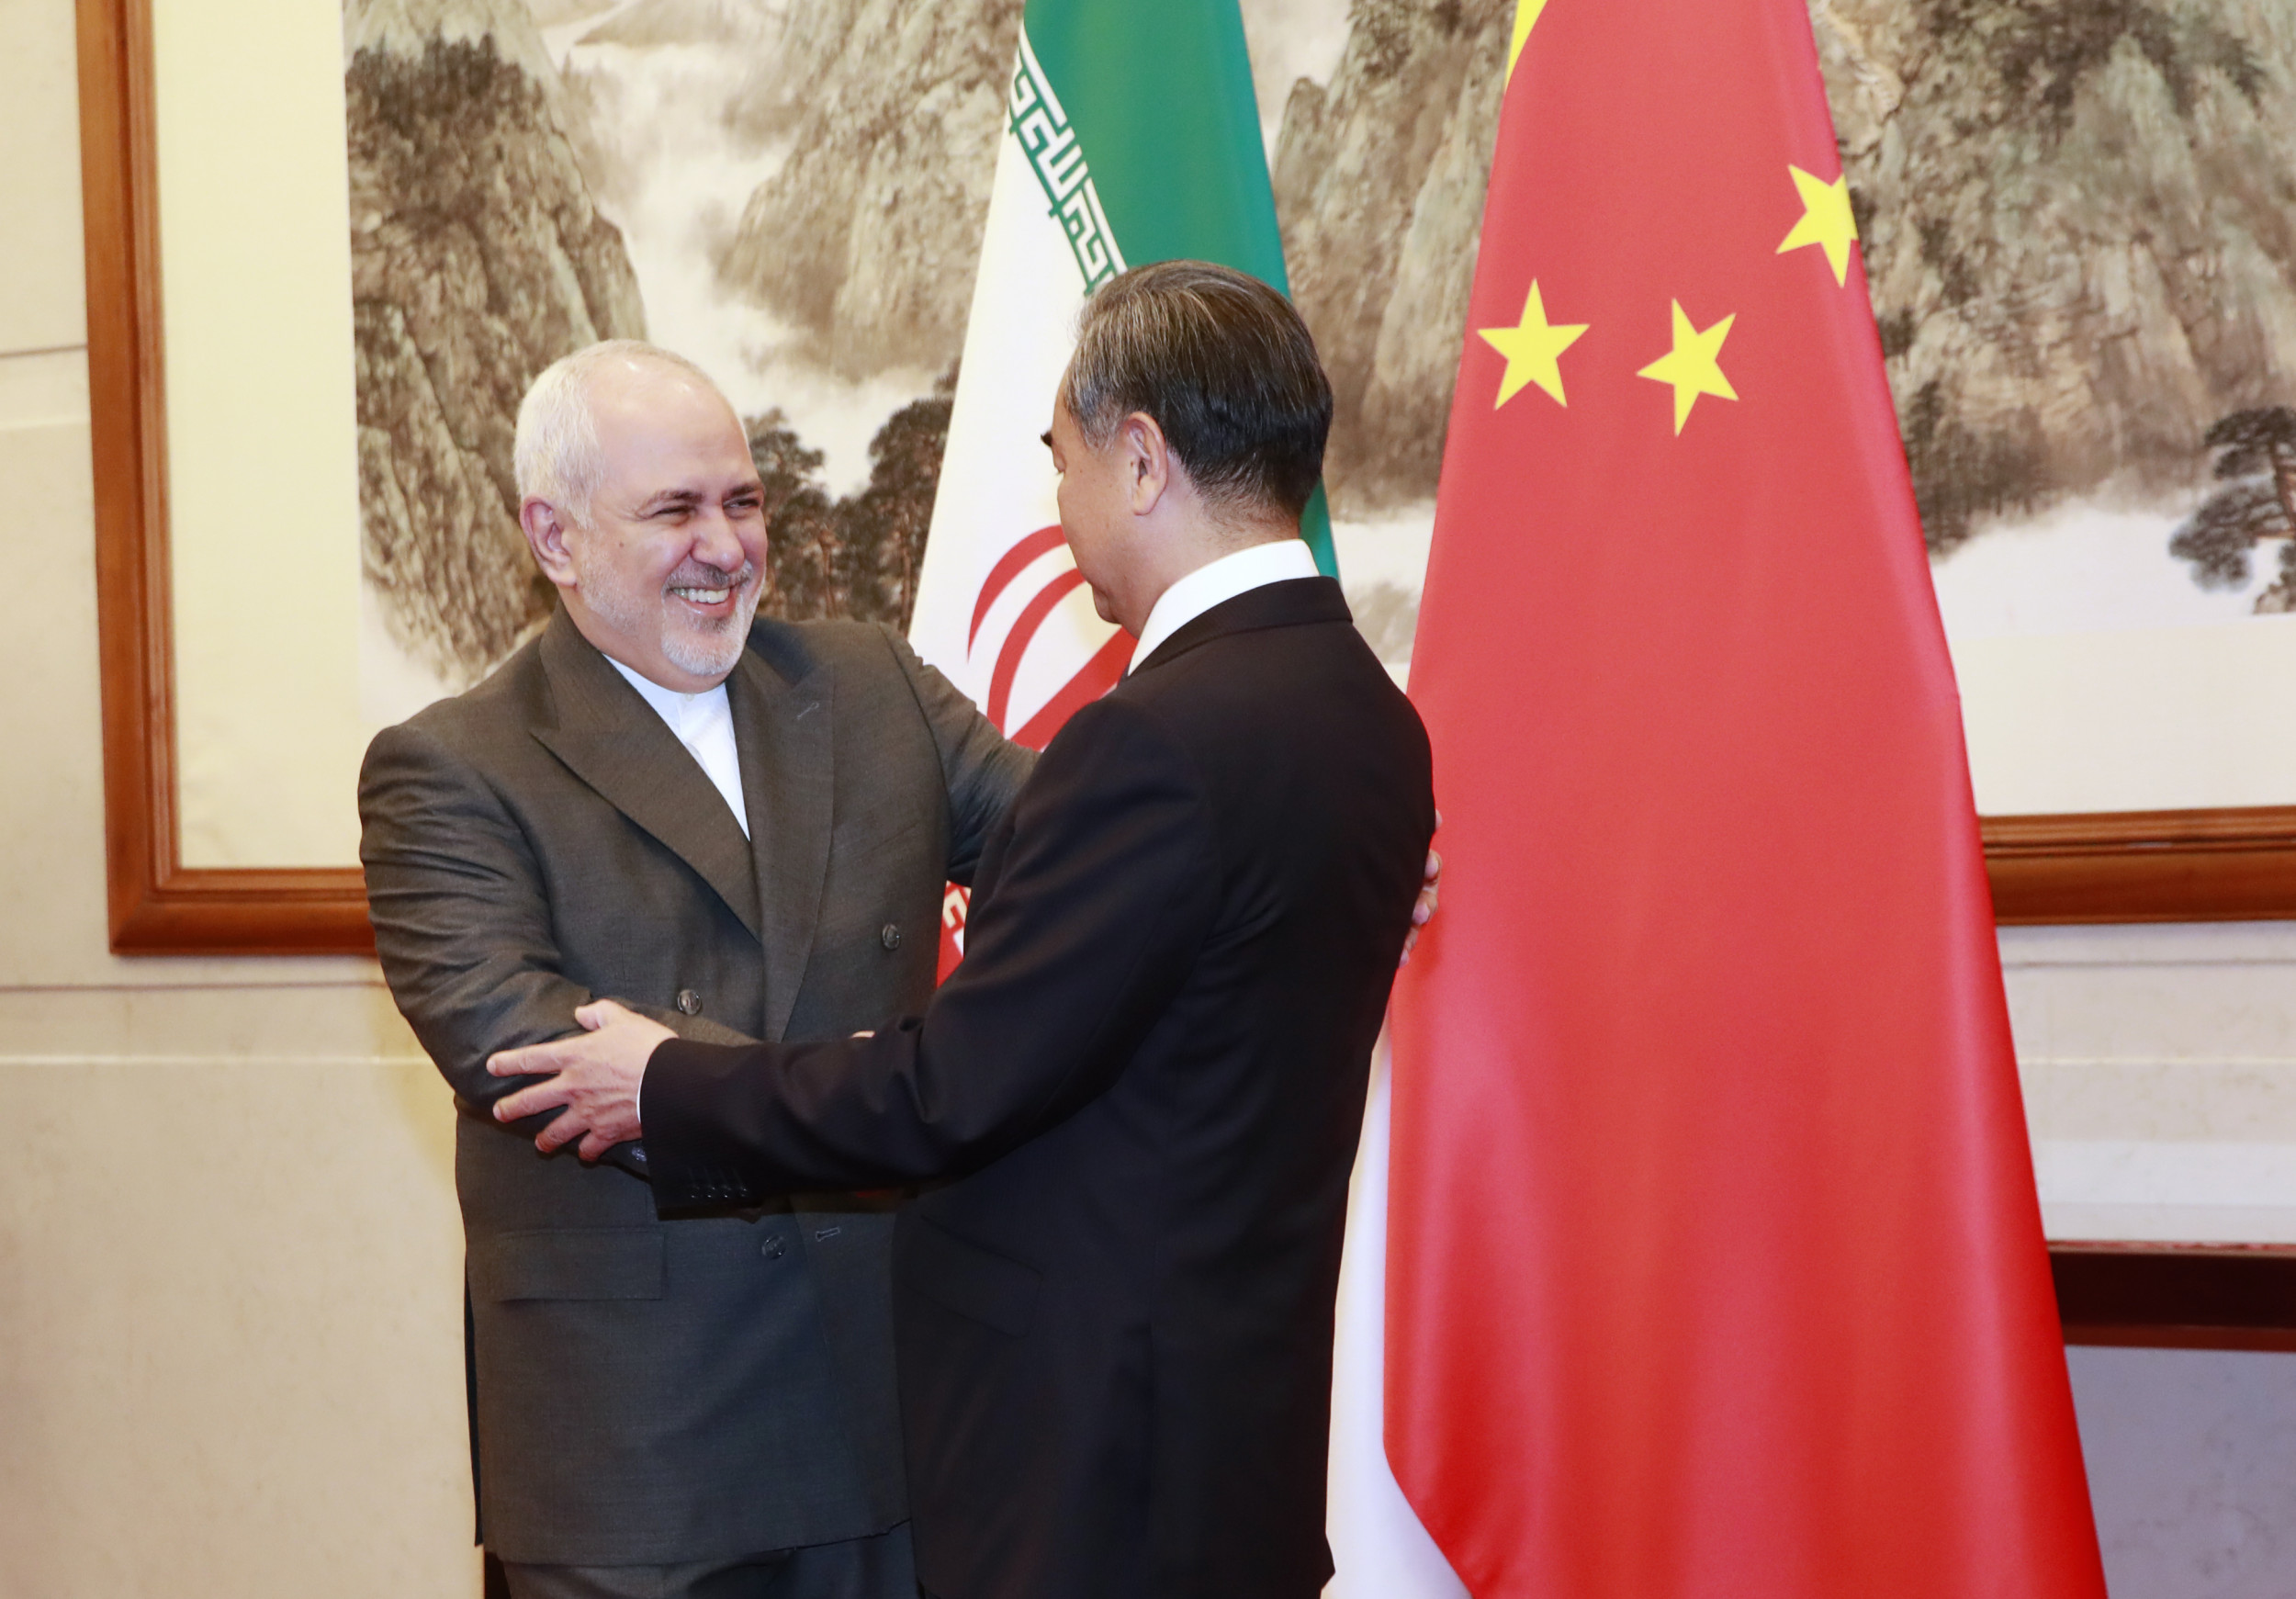 u-s-pressures-china-and-iran-they-move-closer-to-their-own-deal